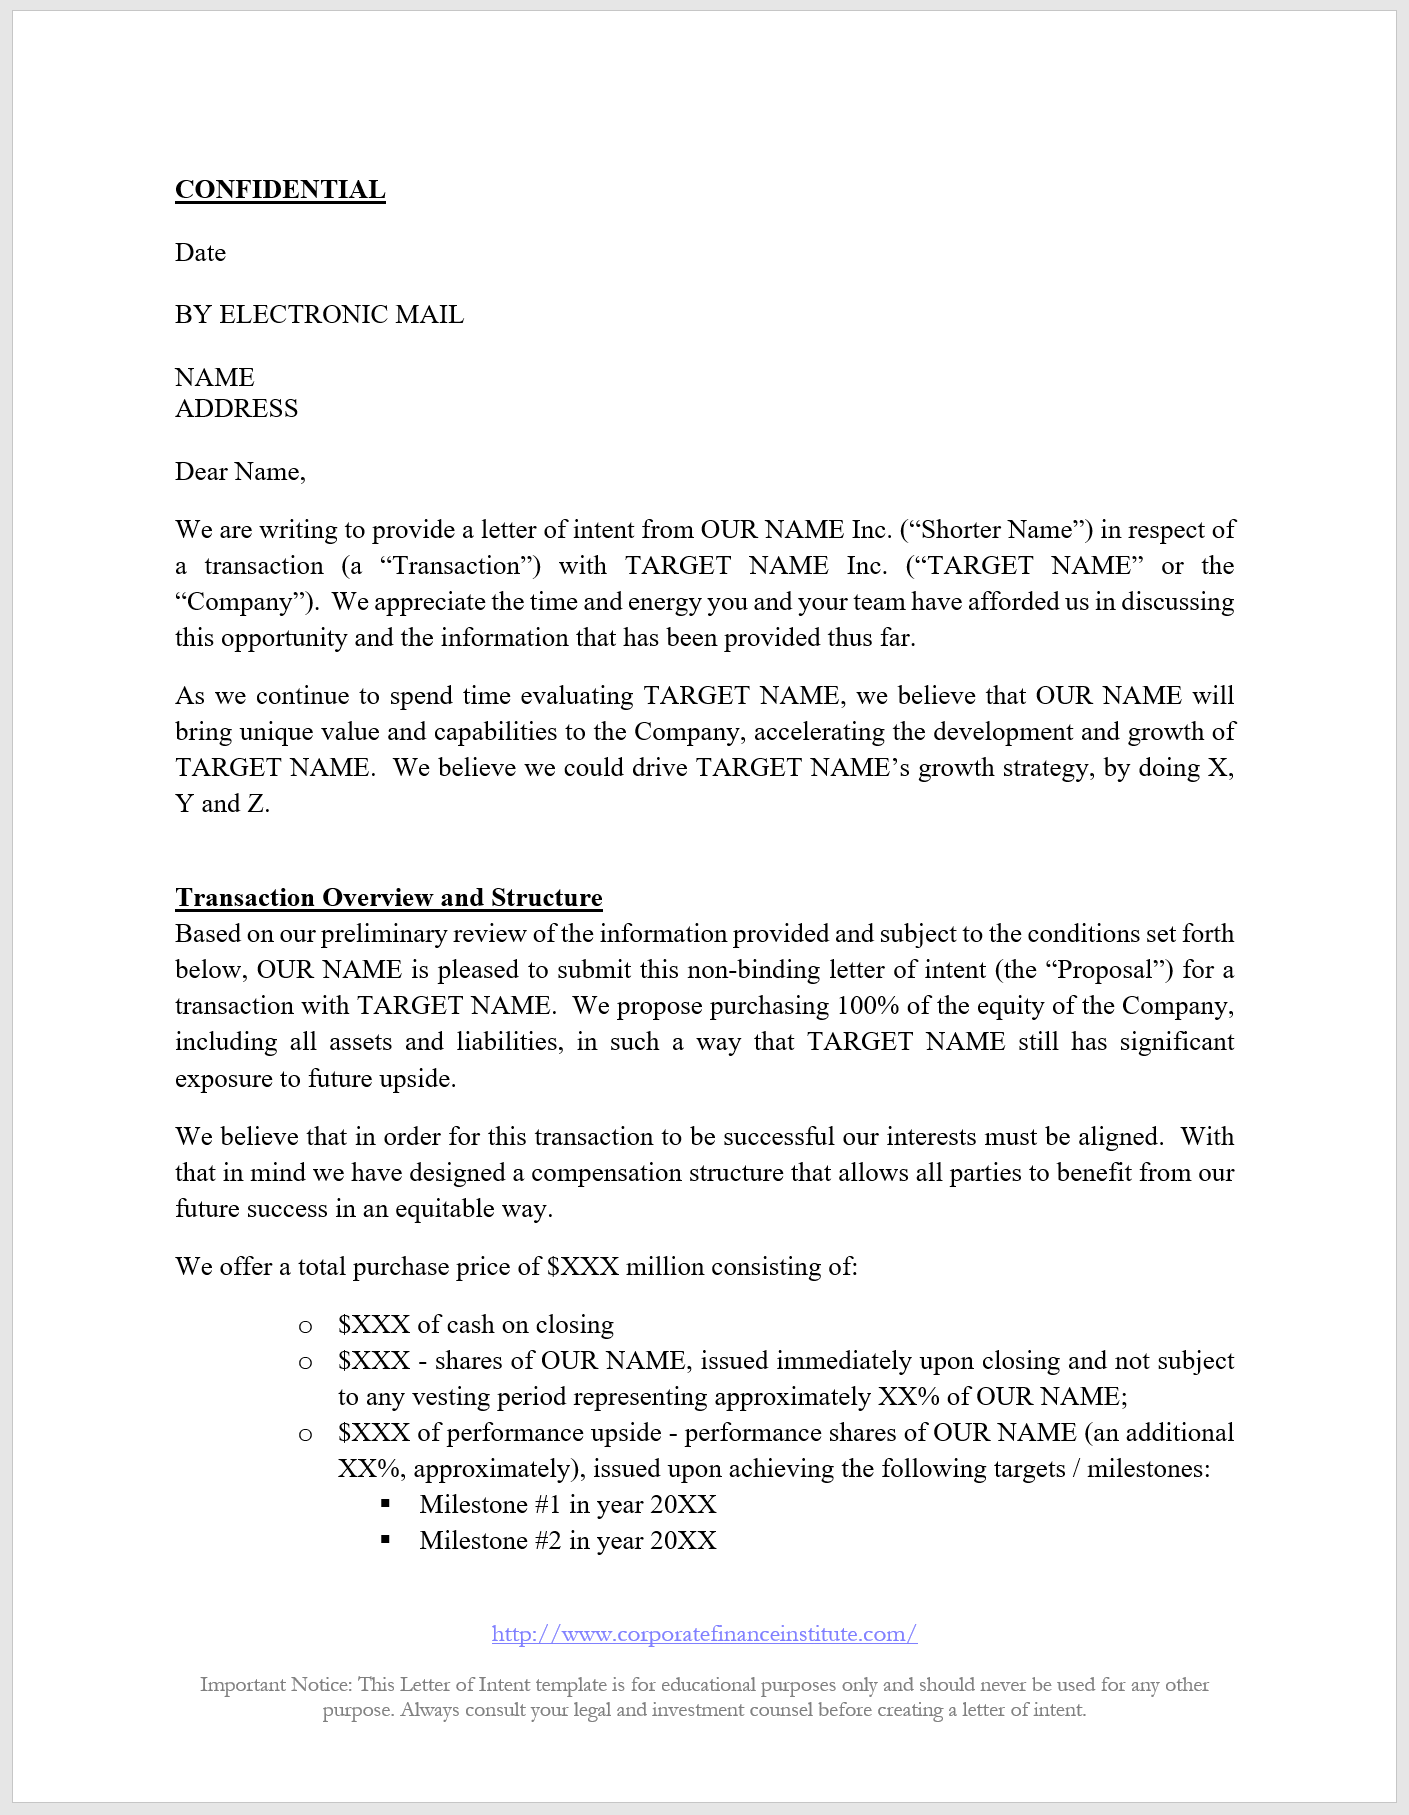 Letter of Intent (LOI) Template - All The Key Terms Included in an LOI